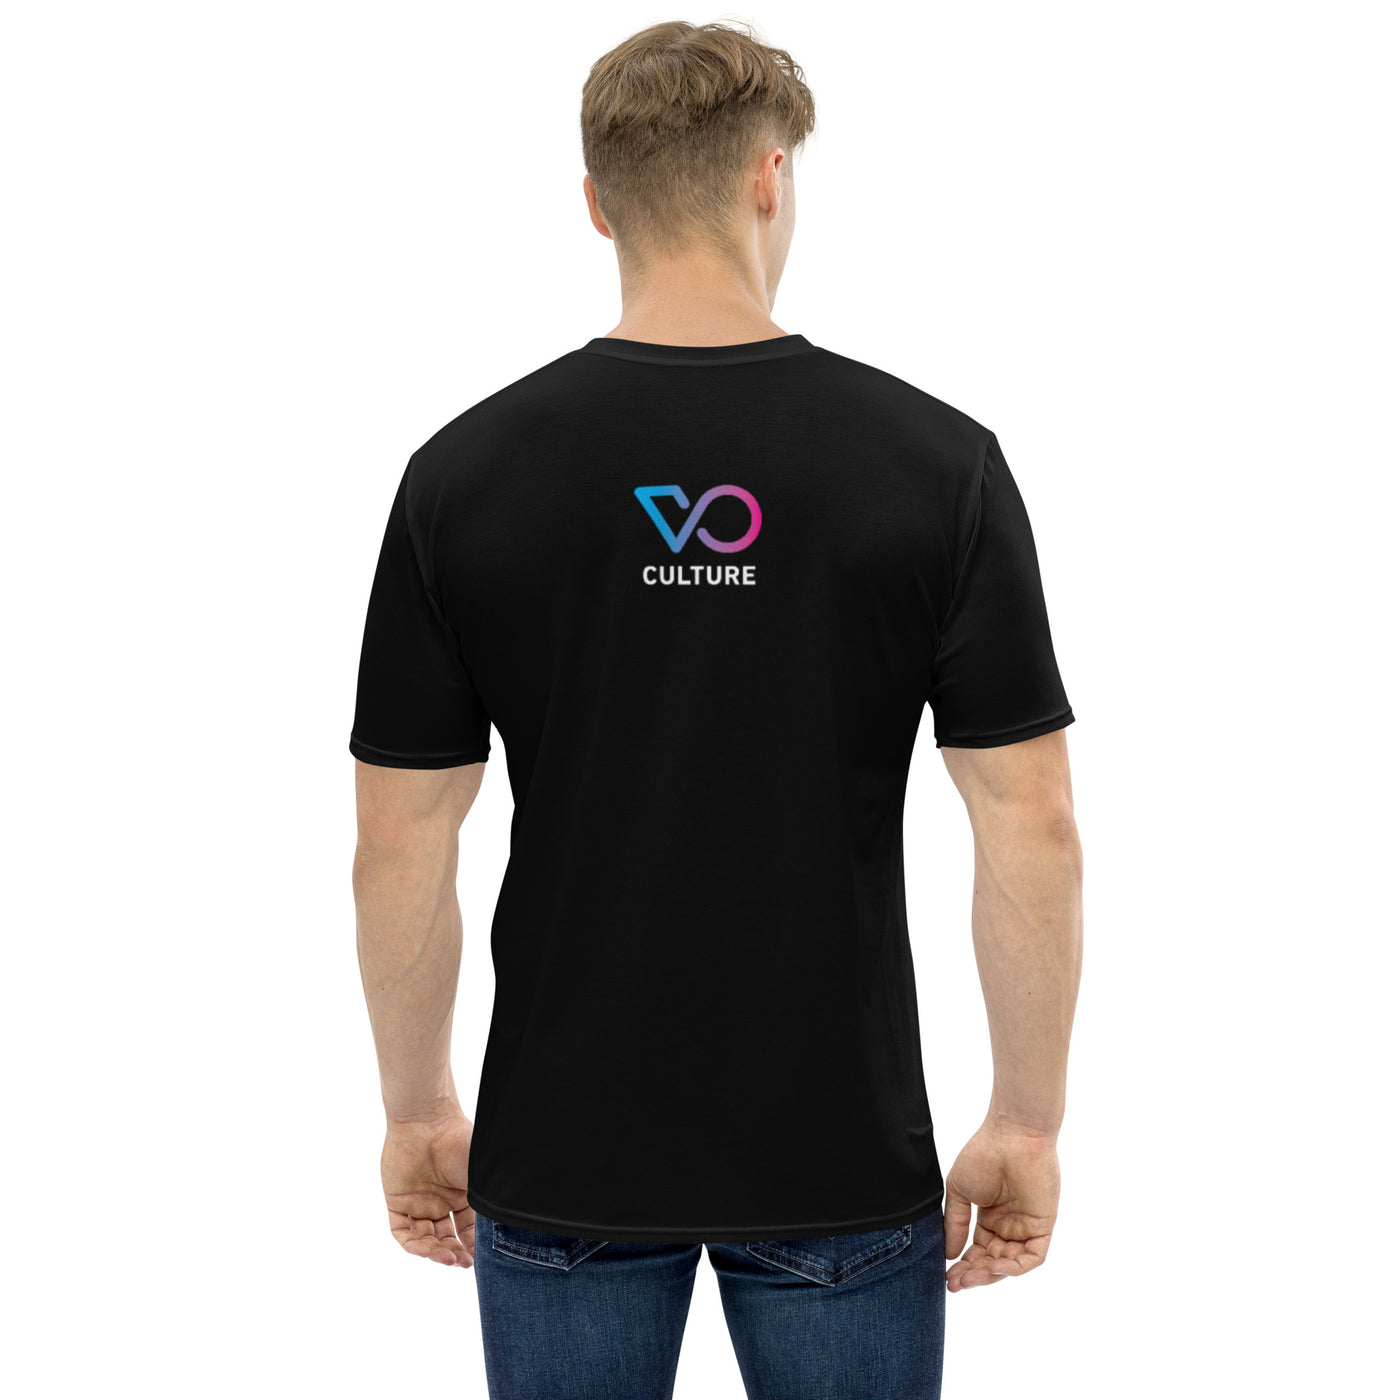 CHECK YOUR LEVELS Male t-shirt